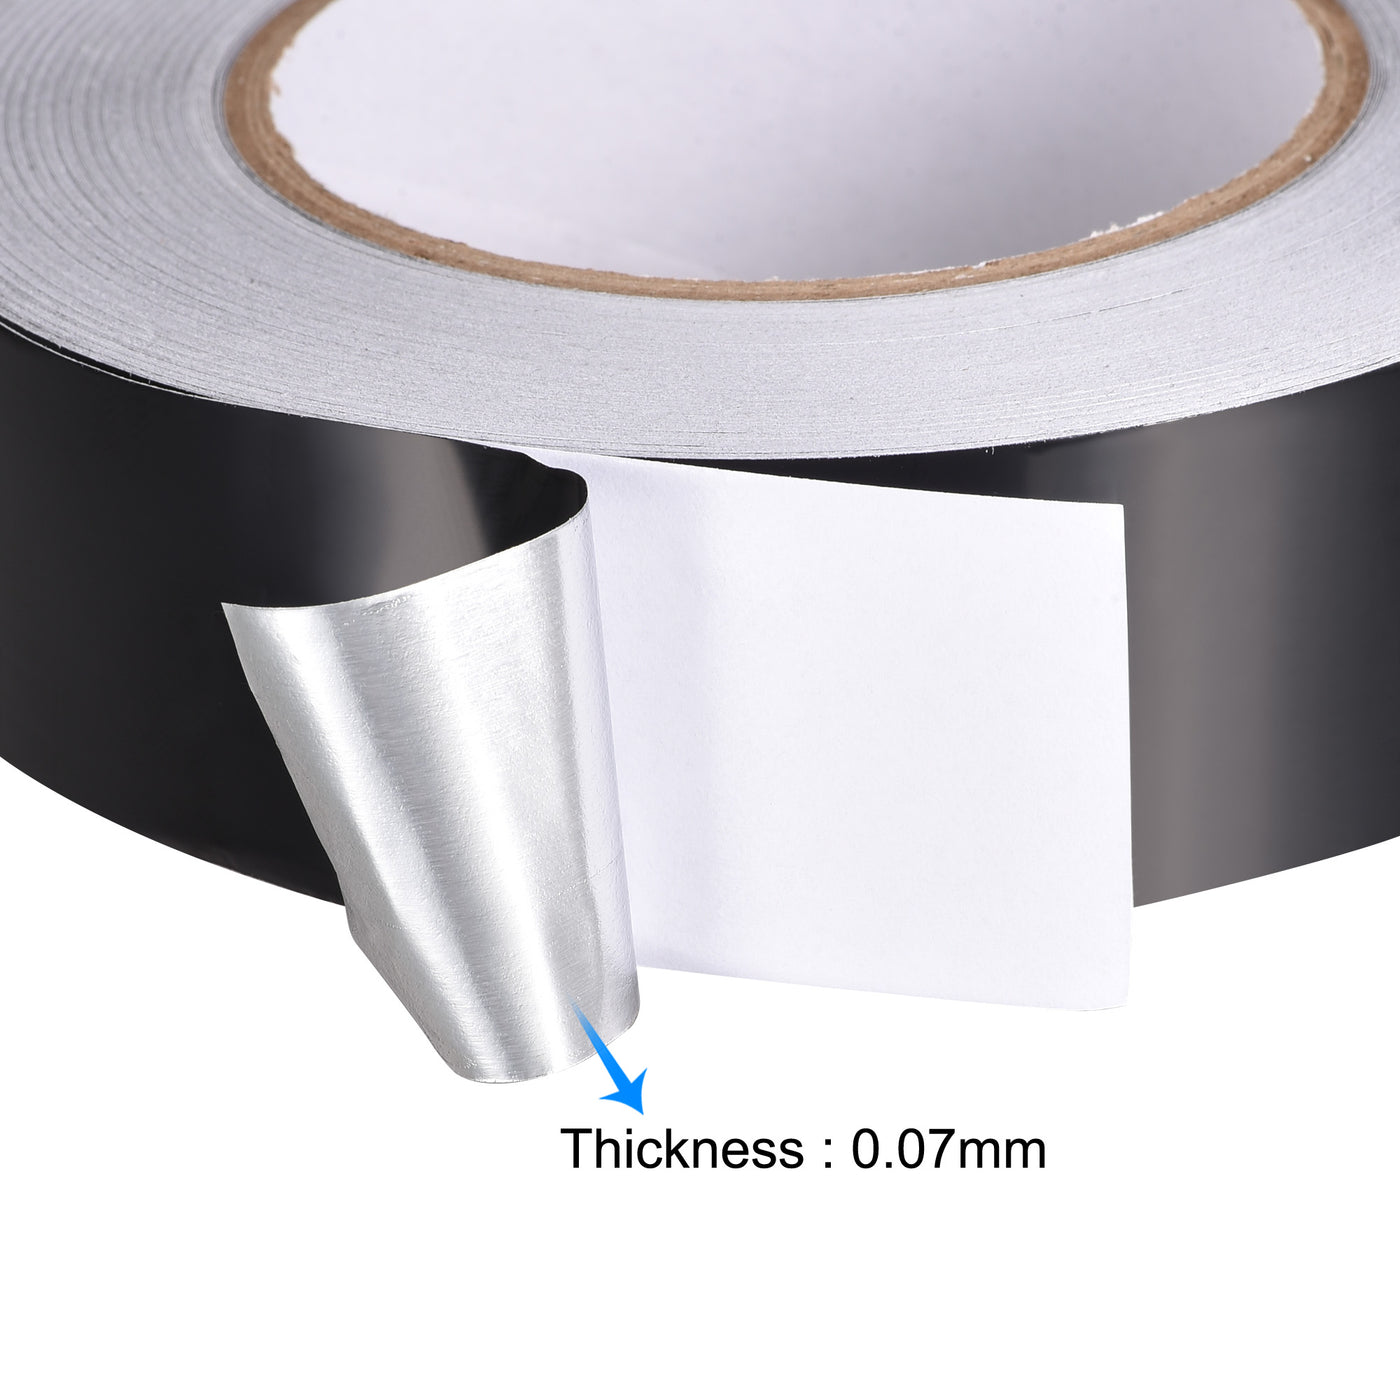 uxcell Uxcell 55mm Aluminum Foil Tape for HVAC, Patching Hot and Blocking light 50m/164ft